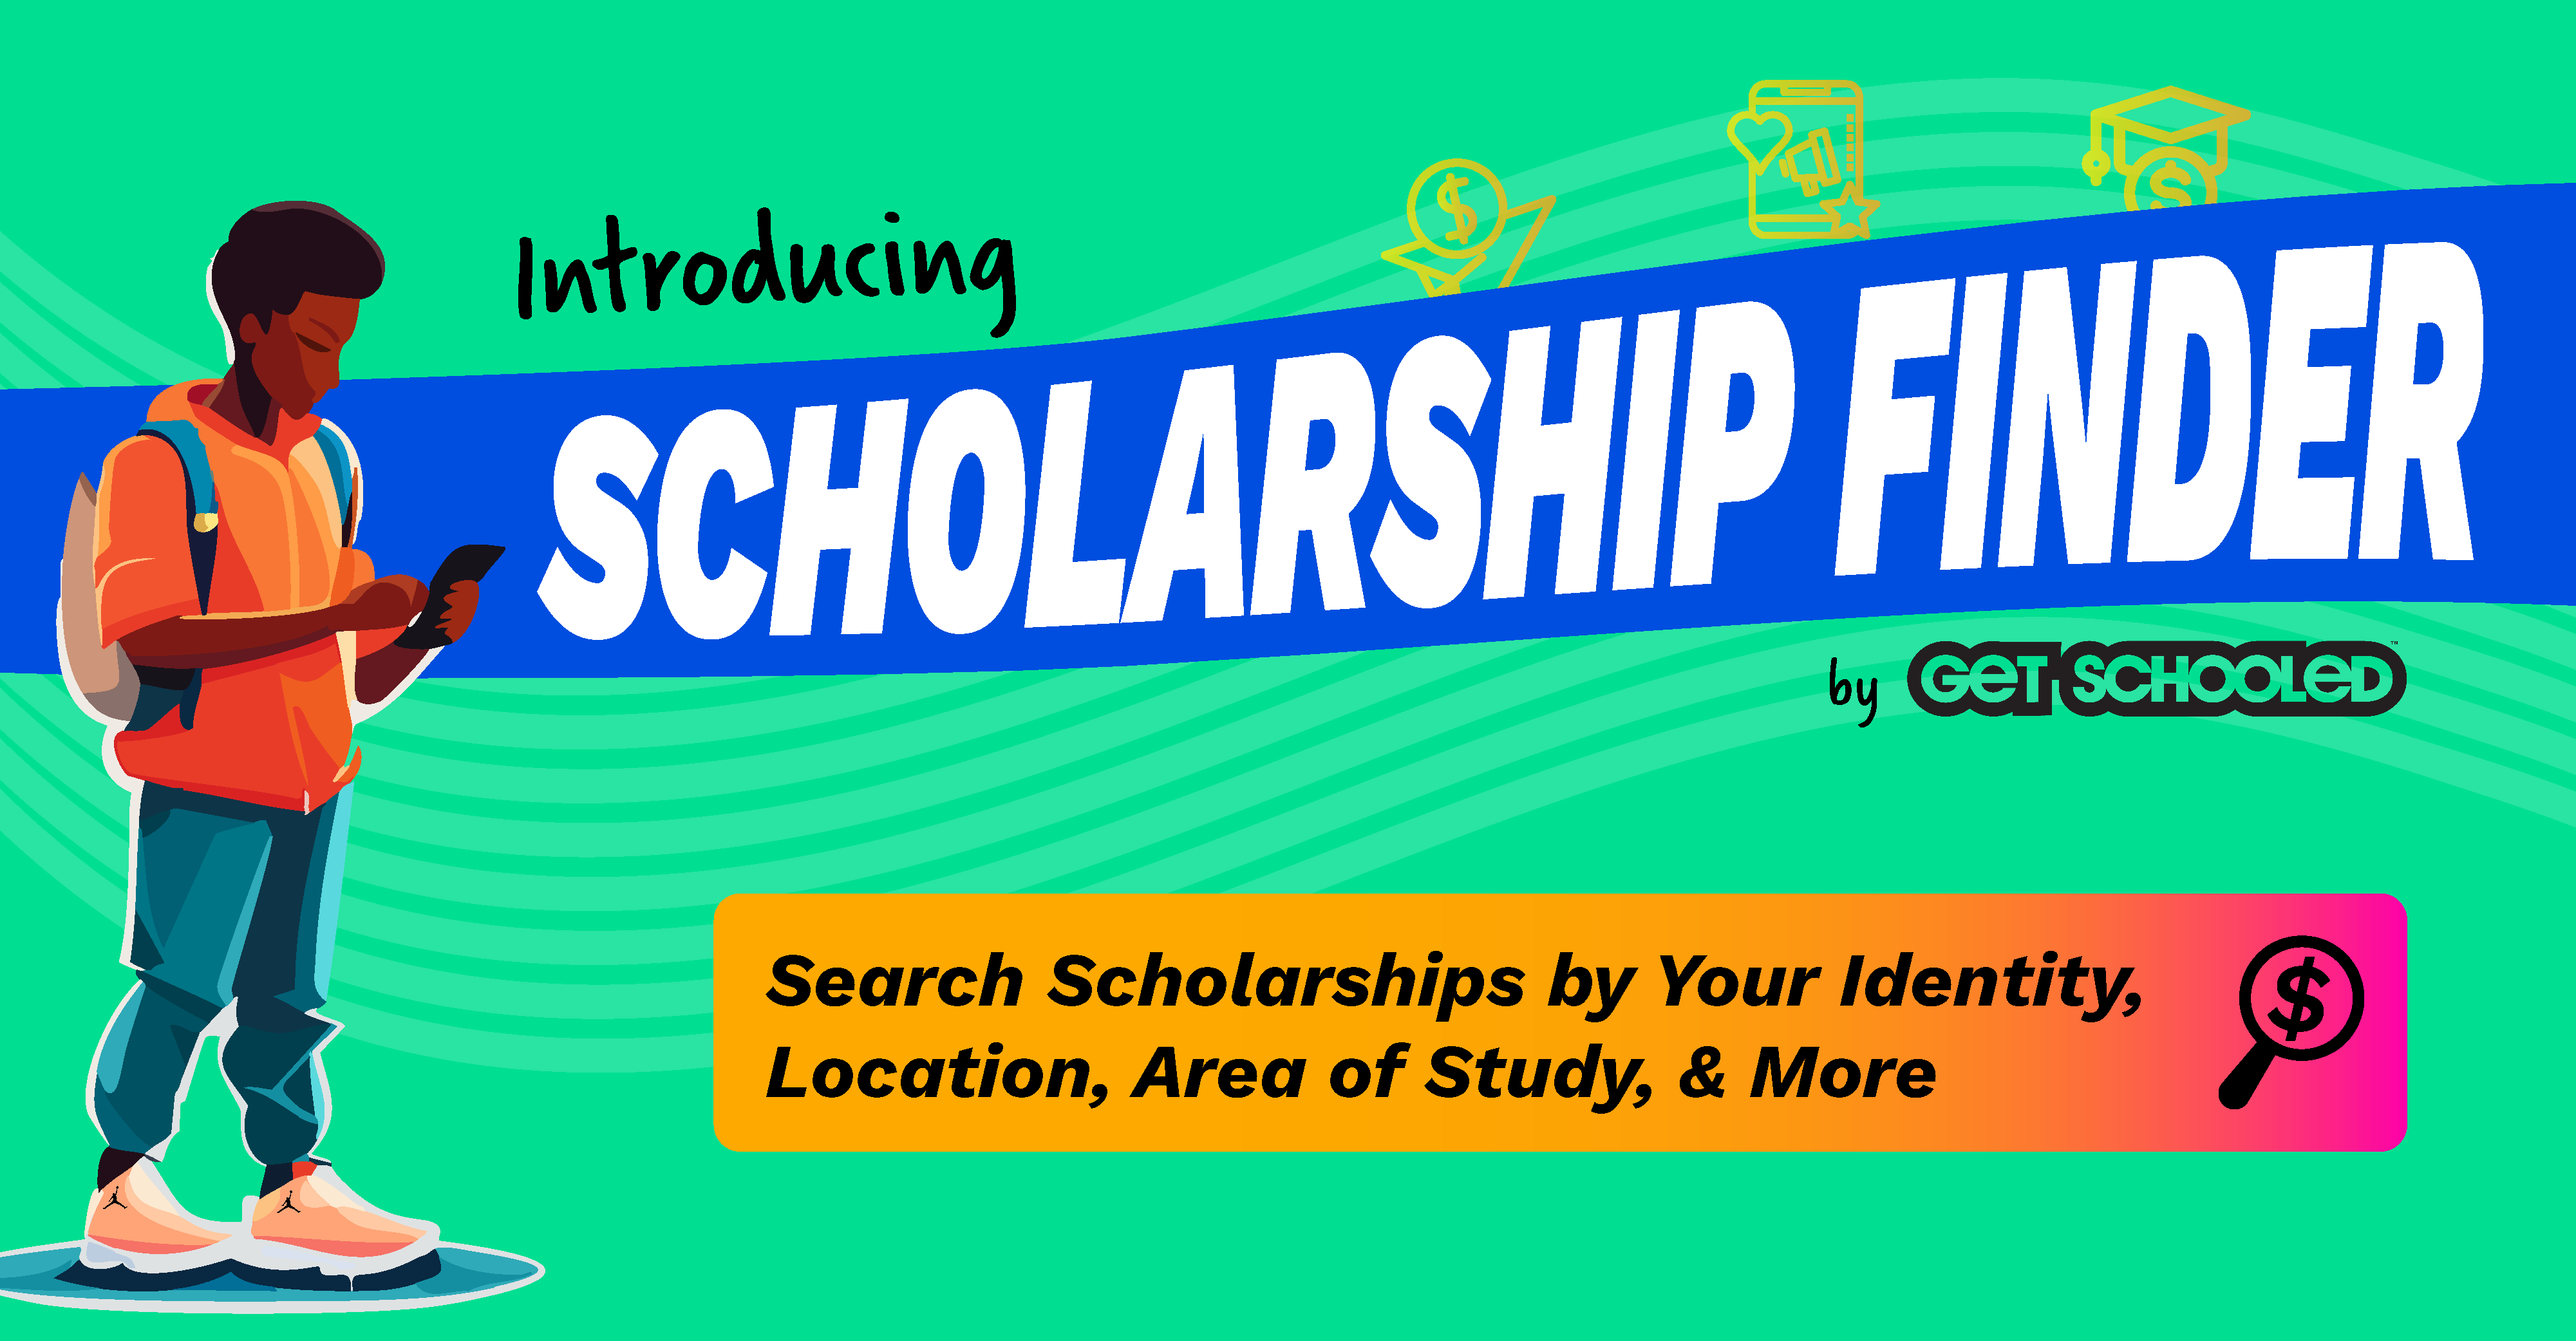 Illustration of a student (cartoon vector) with a backpack, gazing at their phone. The banner promotes the Get Schooled scholarship finder, stating, "Explore the Scholarship Finder by GET SCHOOLED: Discover Opportunities Based on Your Identity, Location, Area of Study, & More." - Scholarships for Texas Students